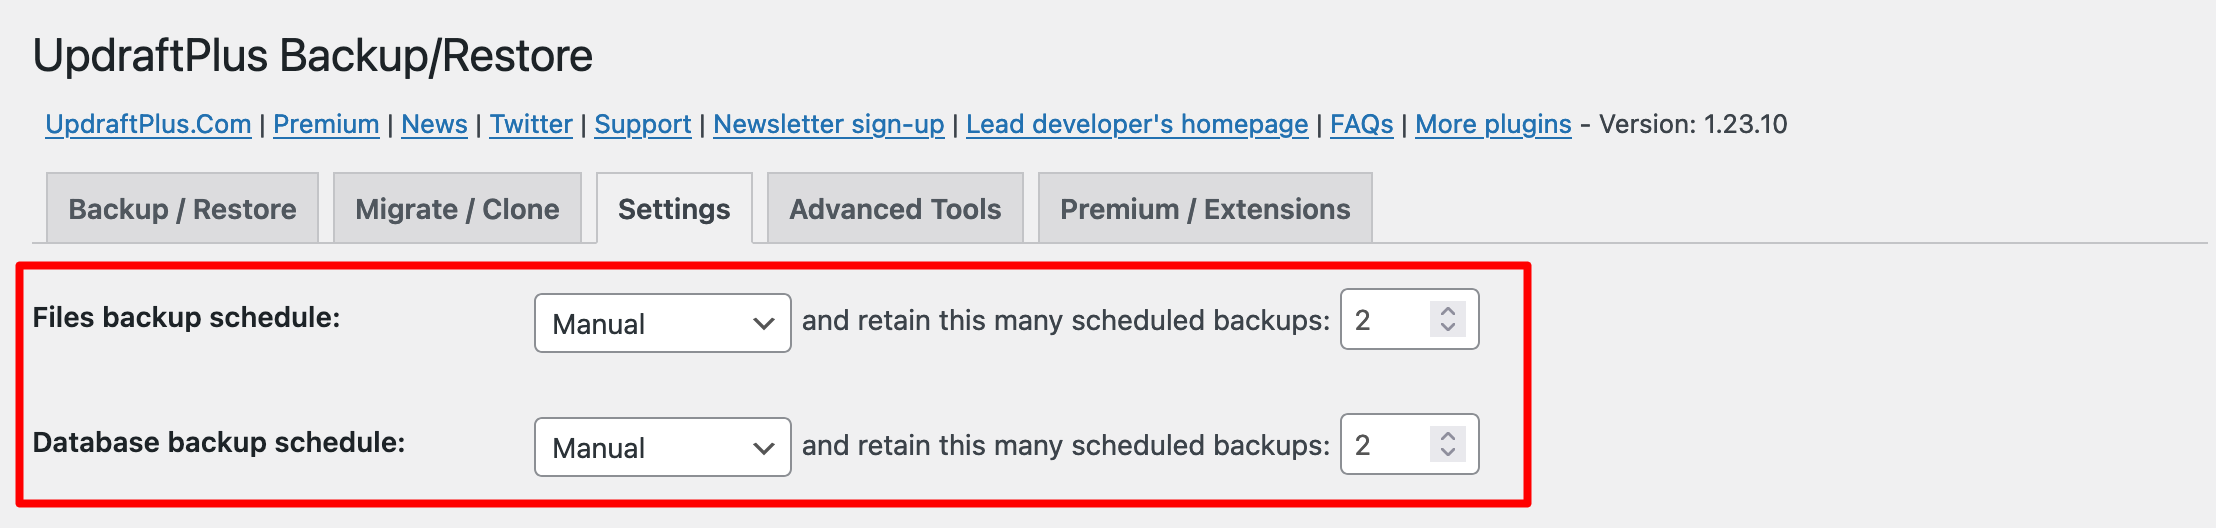 Scheduling backups with UpdraftPlus.